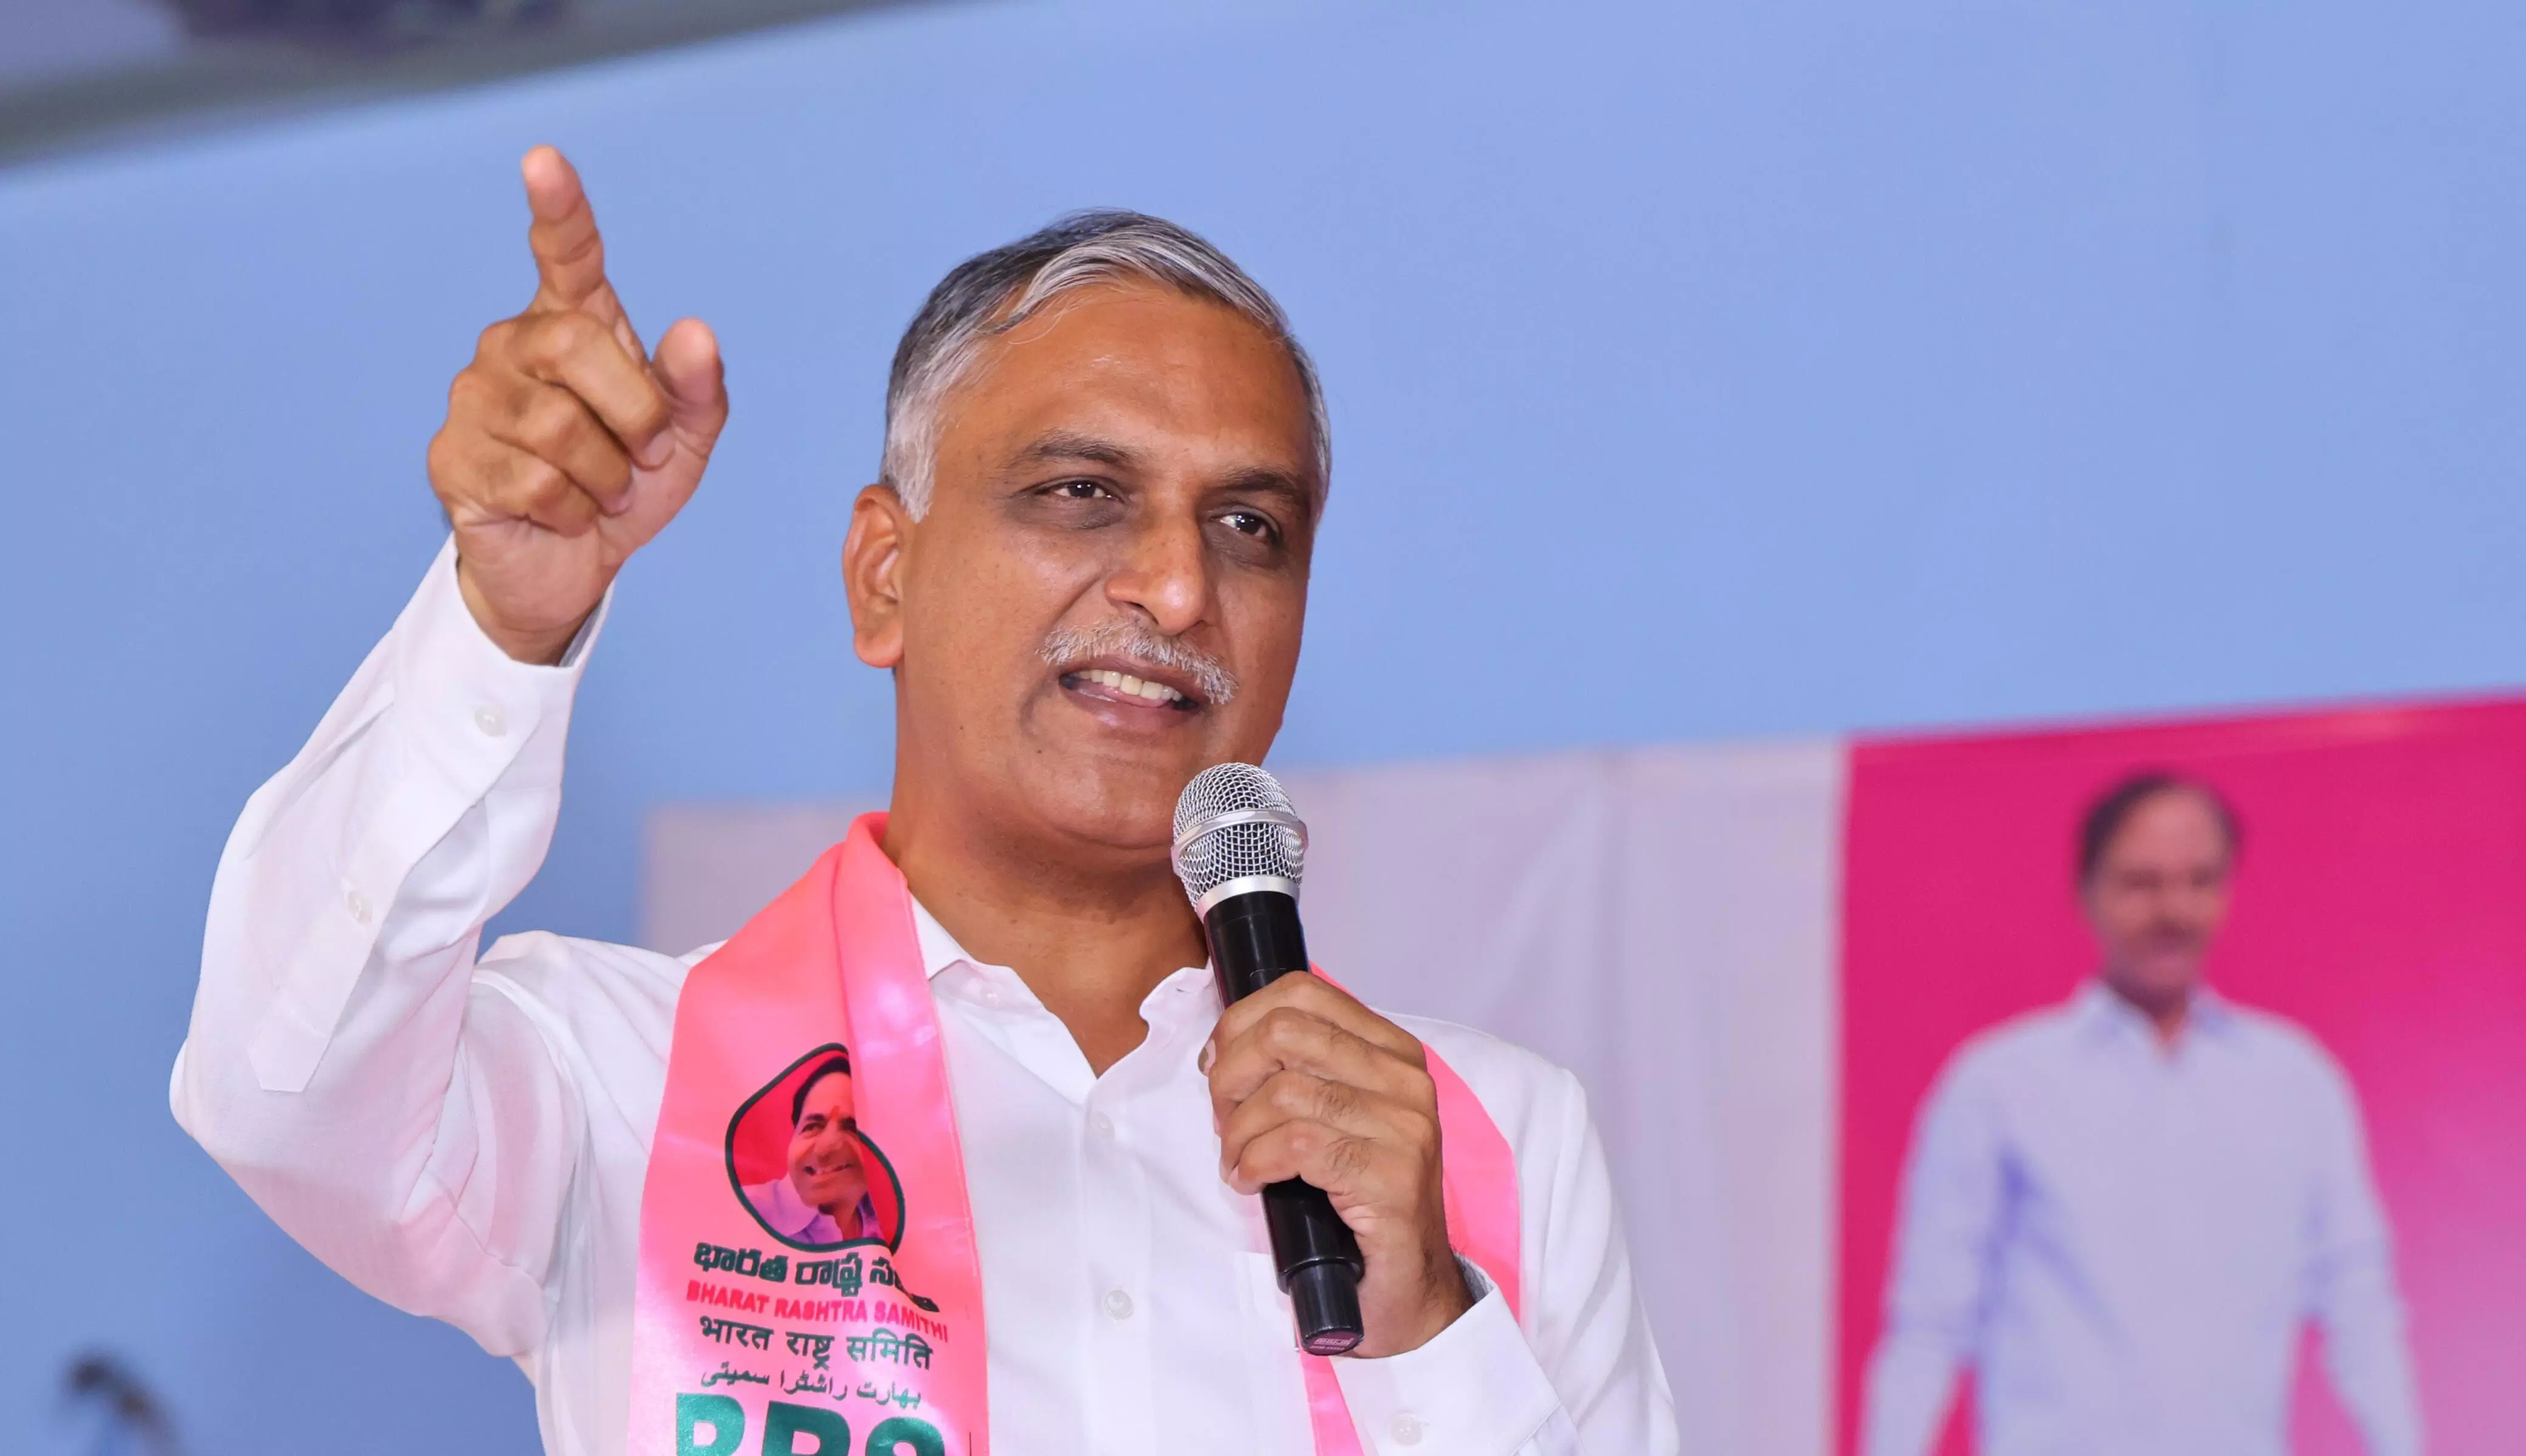 Harish Rao objects to handing over of projects to KRMB, says move detrimental to interests of Telangana